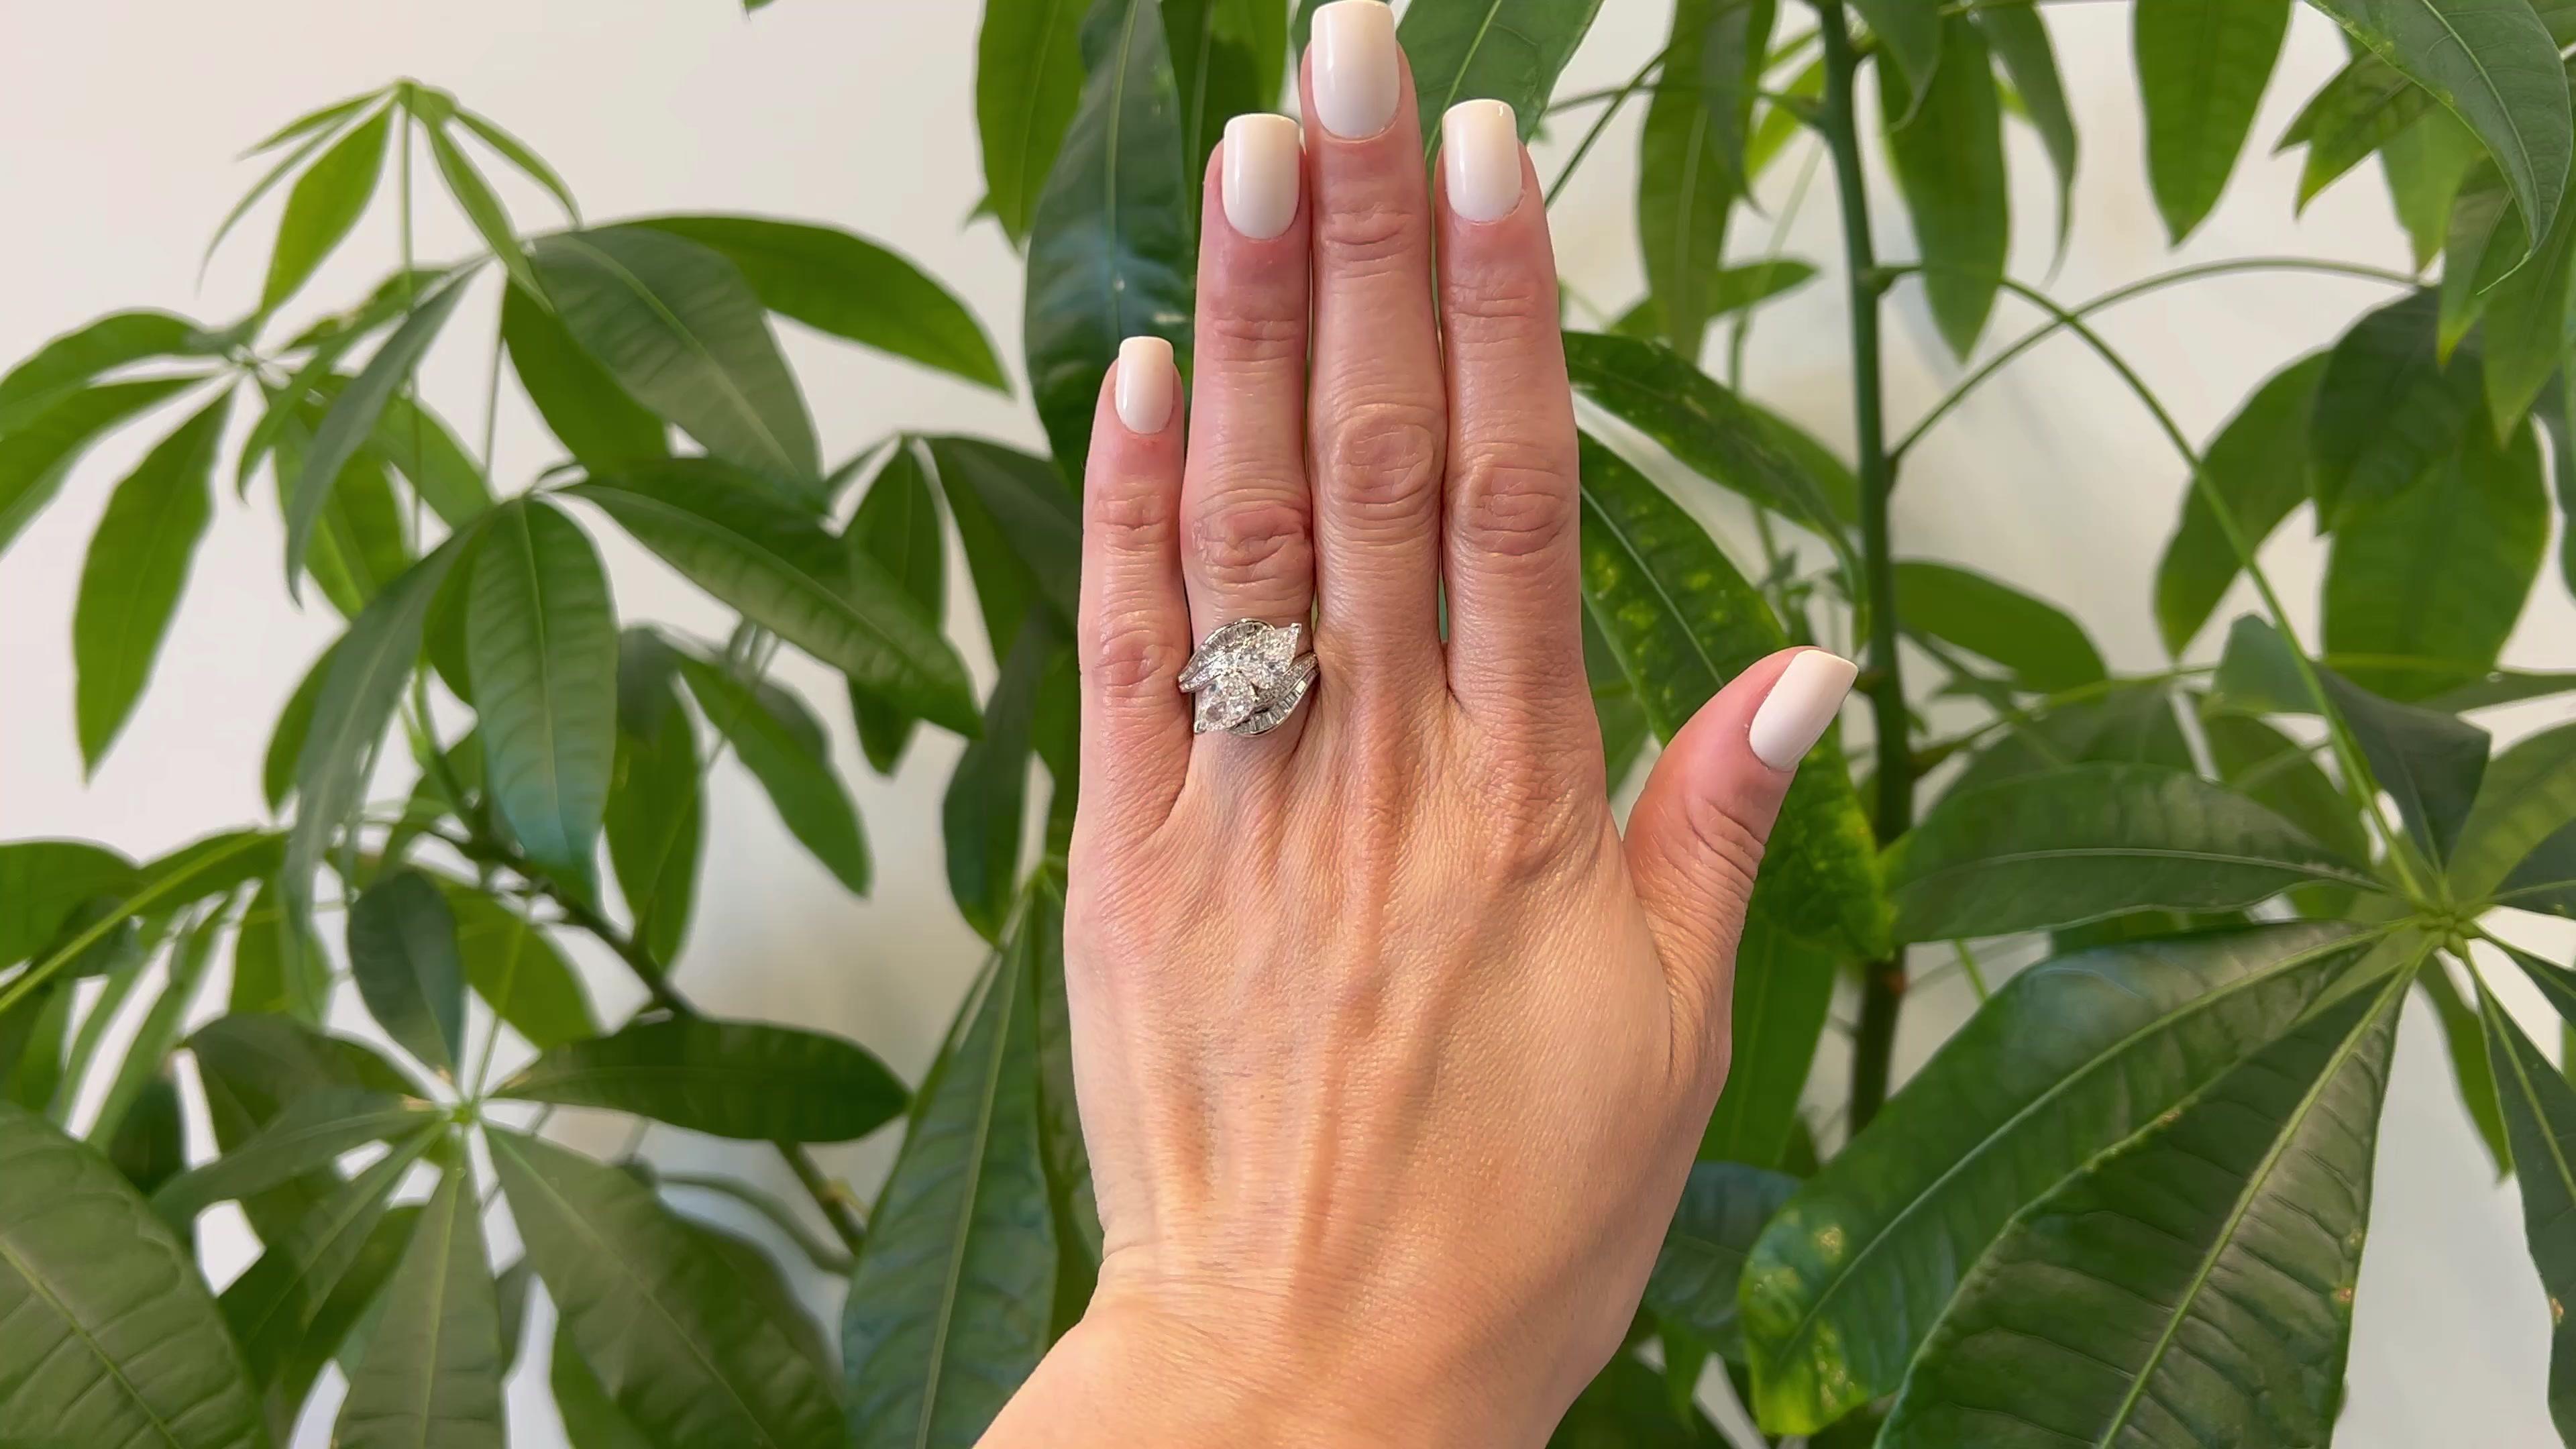 One Mid Century GIA 2.53 Carat Total Weight Pear Cut Diamond Platinum Toi et Moi Ring. Featuring one GIA pear cut diamond of 1.28 carats, accompanied with GIA #5221999332 stating the diamond is D color, SI1 clarity, and one GIA pear cut diamond of